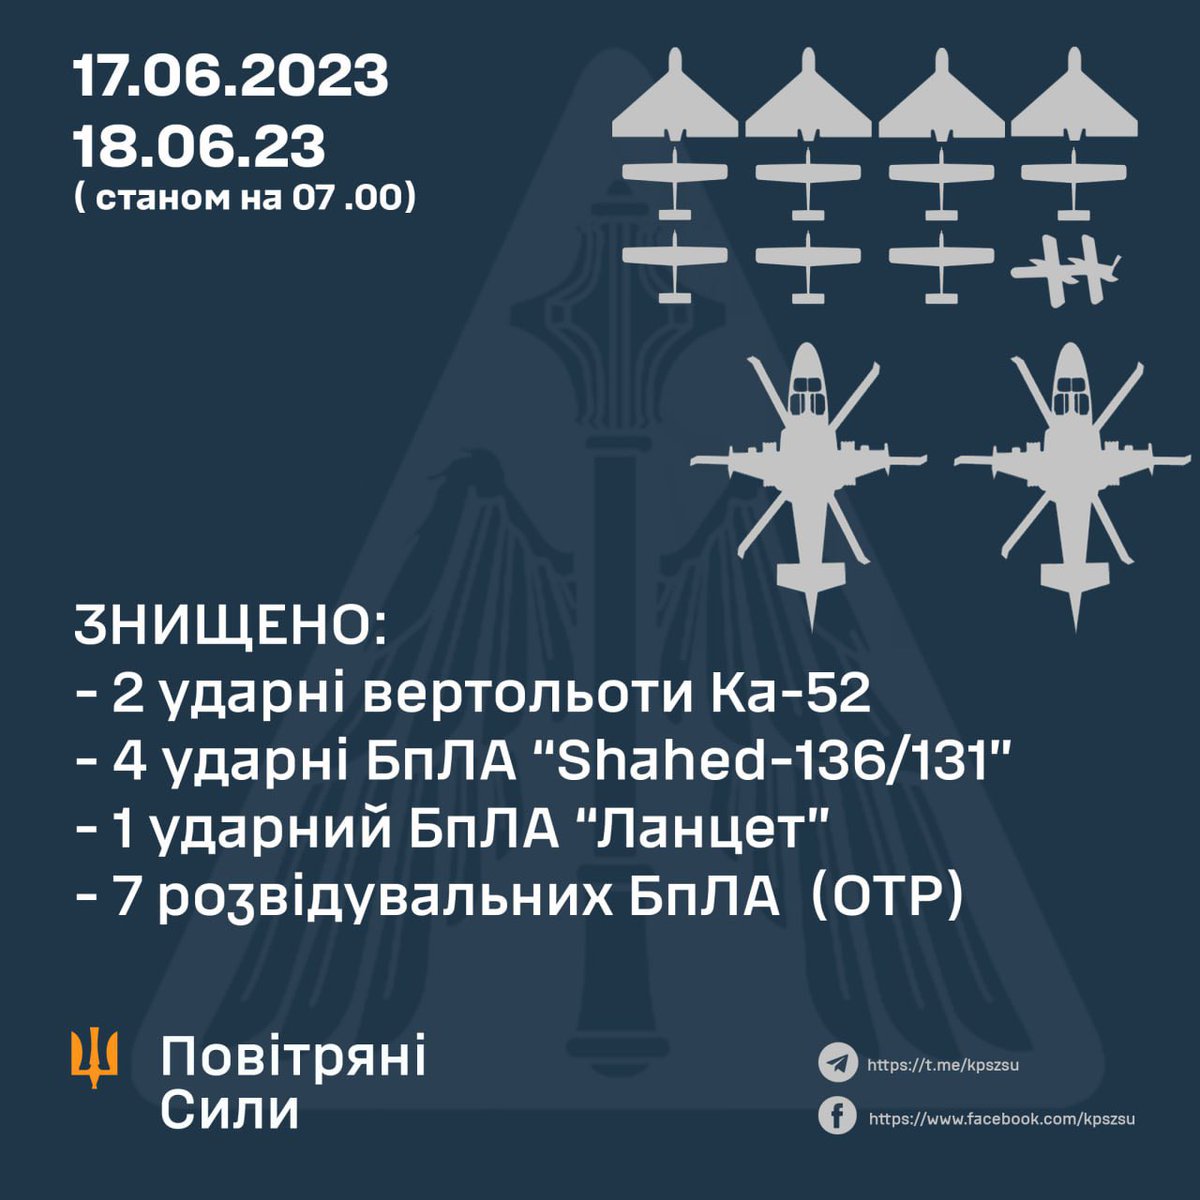 Yesterday, the Ukrainian Armee Forces downed two Russian Ka-52 attack helicopters and 12 drones (4 Shahed’s, 7 Orlan’s and one Lancet drone).